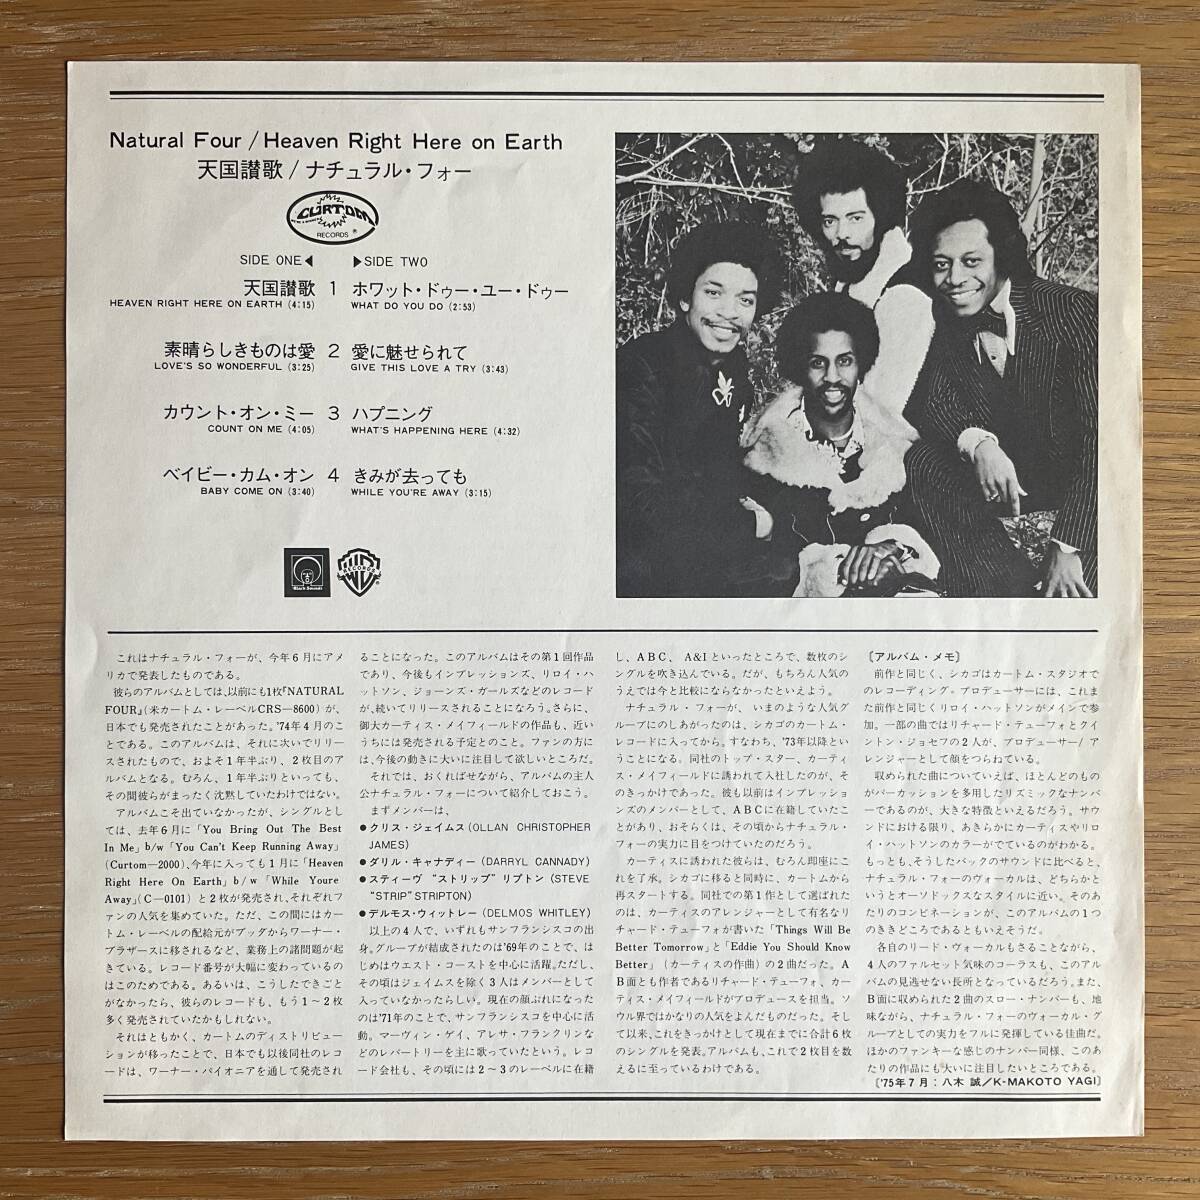 NATURAL FOUR 天国讃歌 Heaven Right Here On Earth 国内盤 LP 帯付き 1975 WARNER P-10043W_画像4